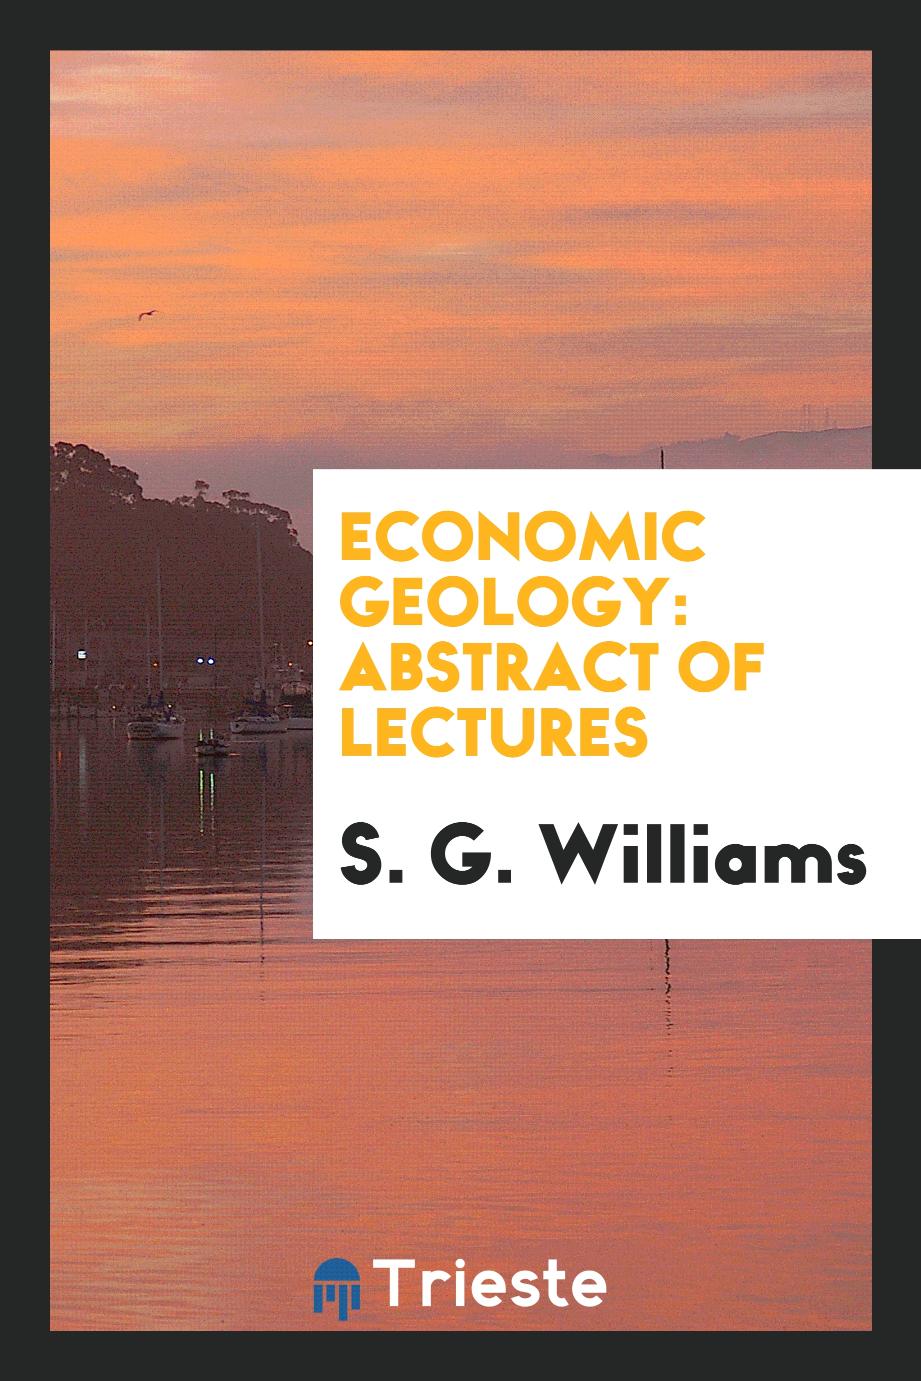 Economic Geology: Abstract of Lectures